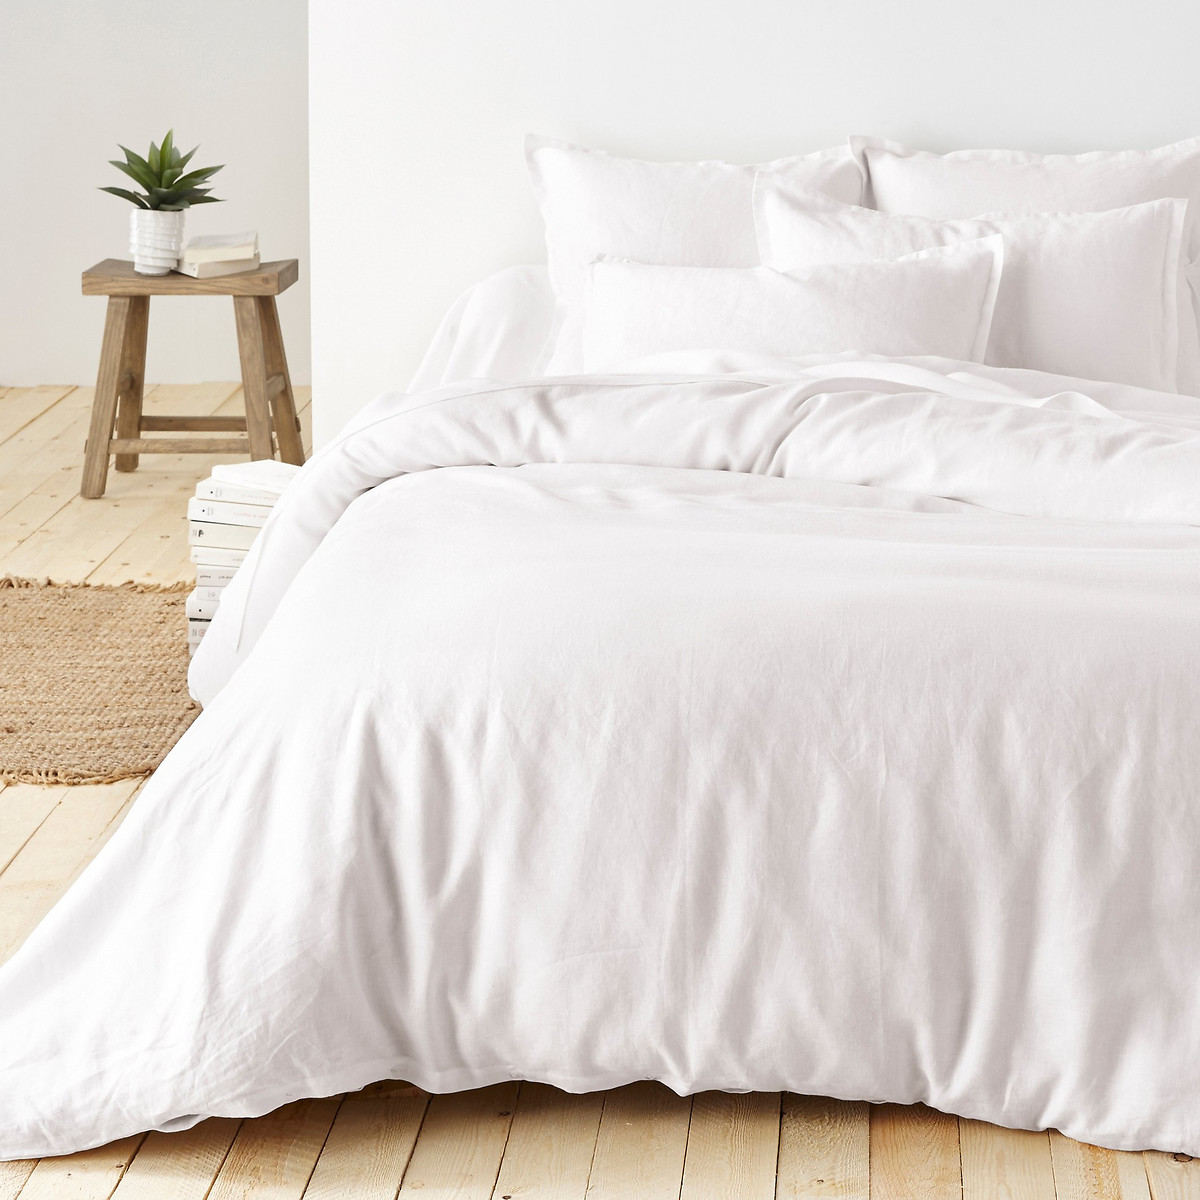 Linot Plain Washed Linen Duvet Cover La, What Are The Dimensions Of A Queen Duvet Cover